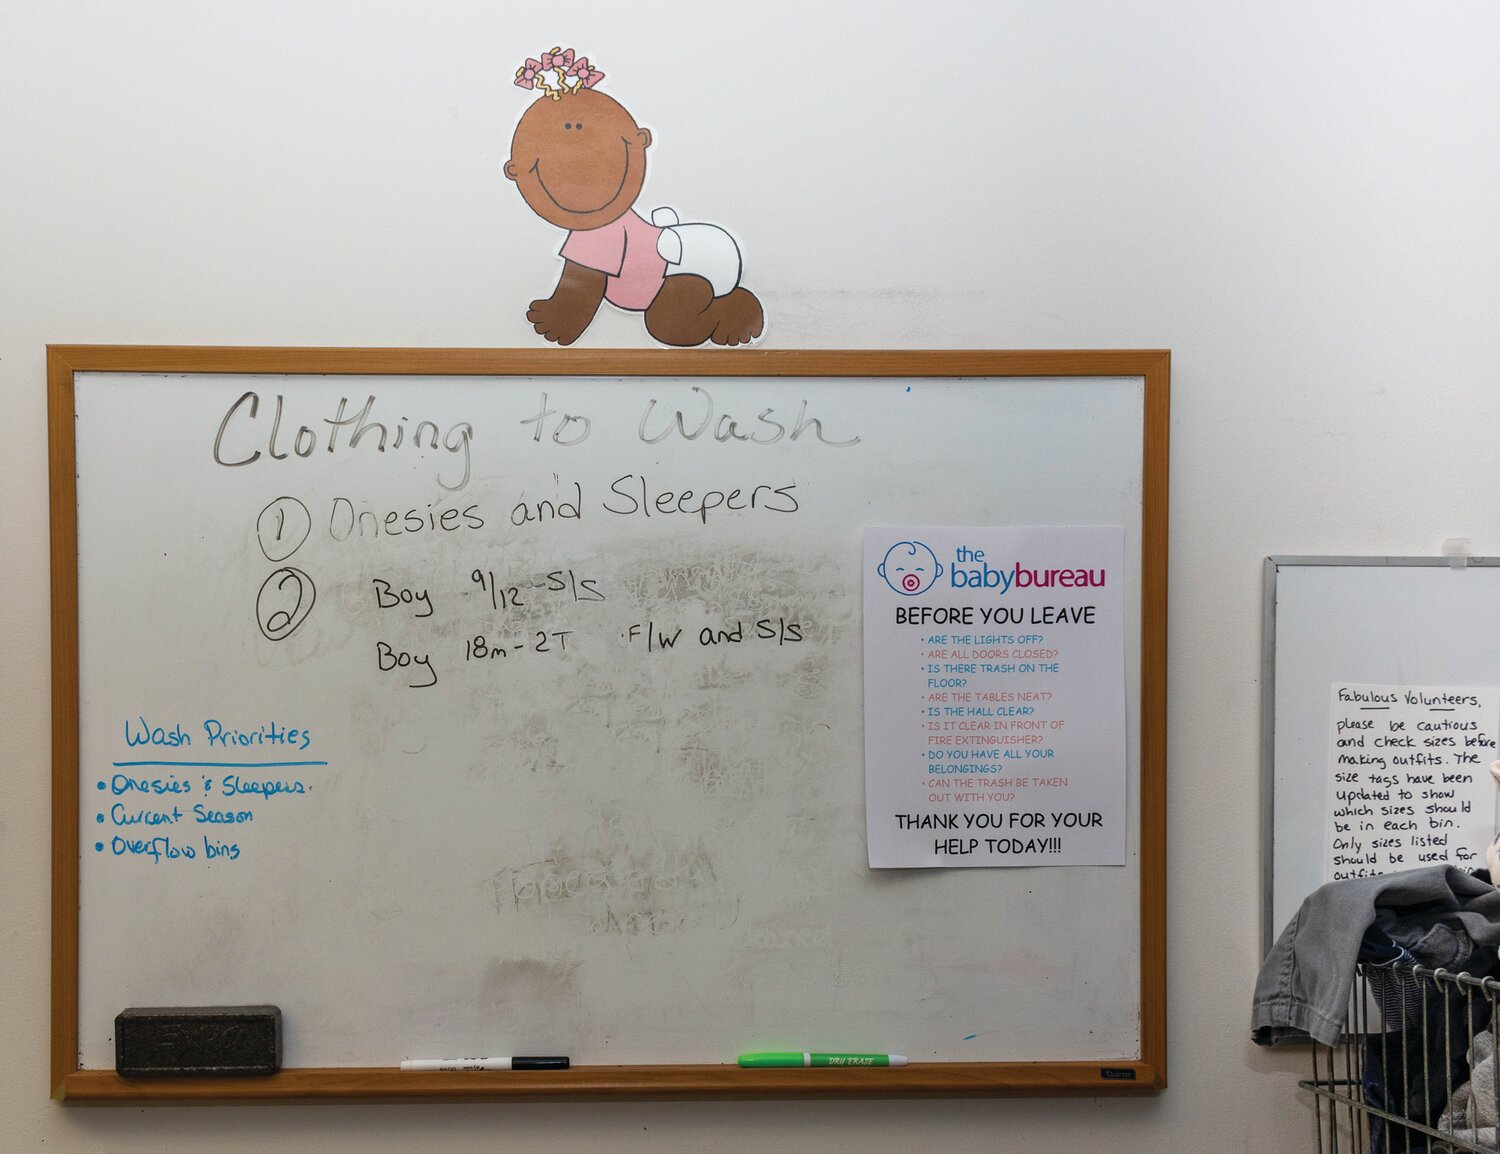 A whiteboard lays out the priorities for volunteers on a particular day in October.